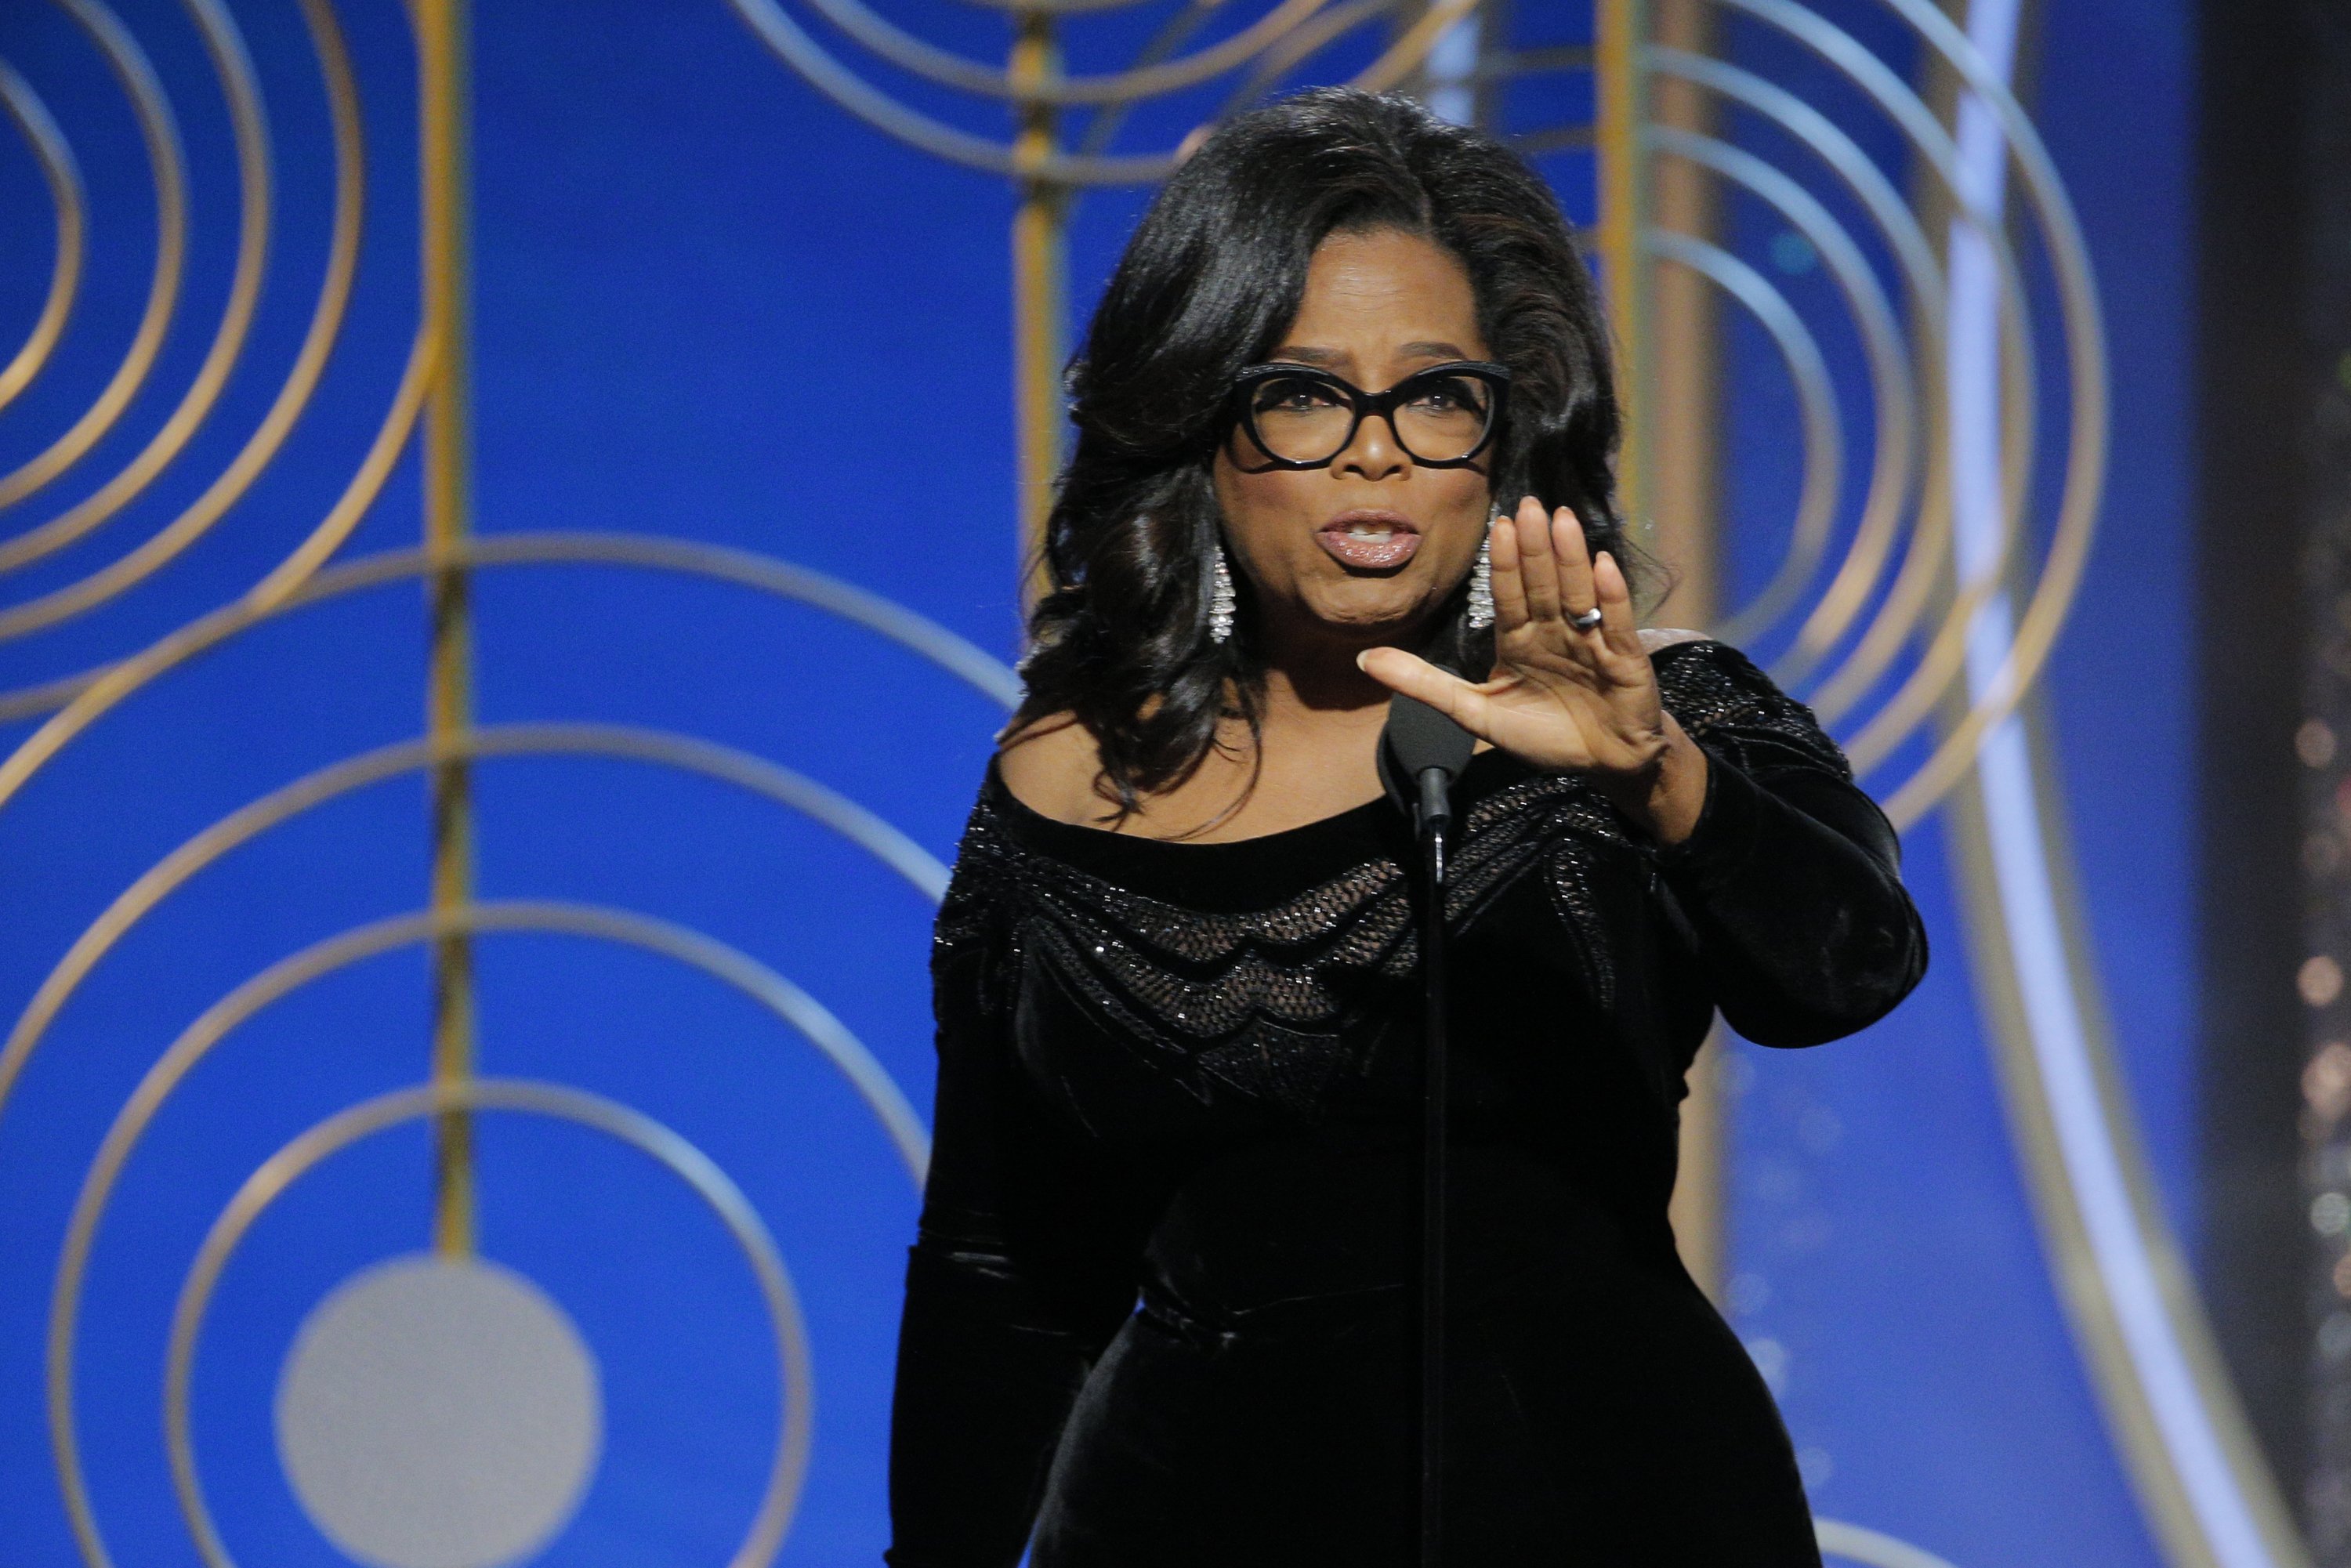 Oprah Winfrey at the 75th Annual Golden Globe Awards at The Beverly Hilton Hotel on January 7, 2018 in Beverly Hills, California.|Source: Getty Images